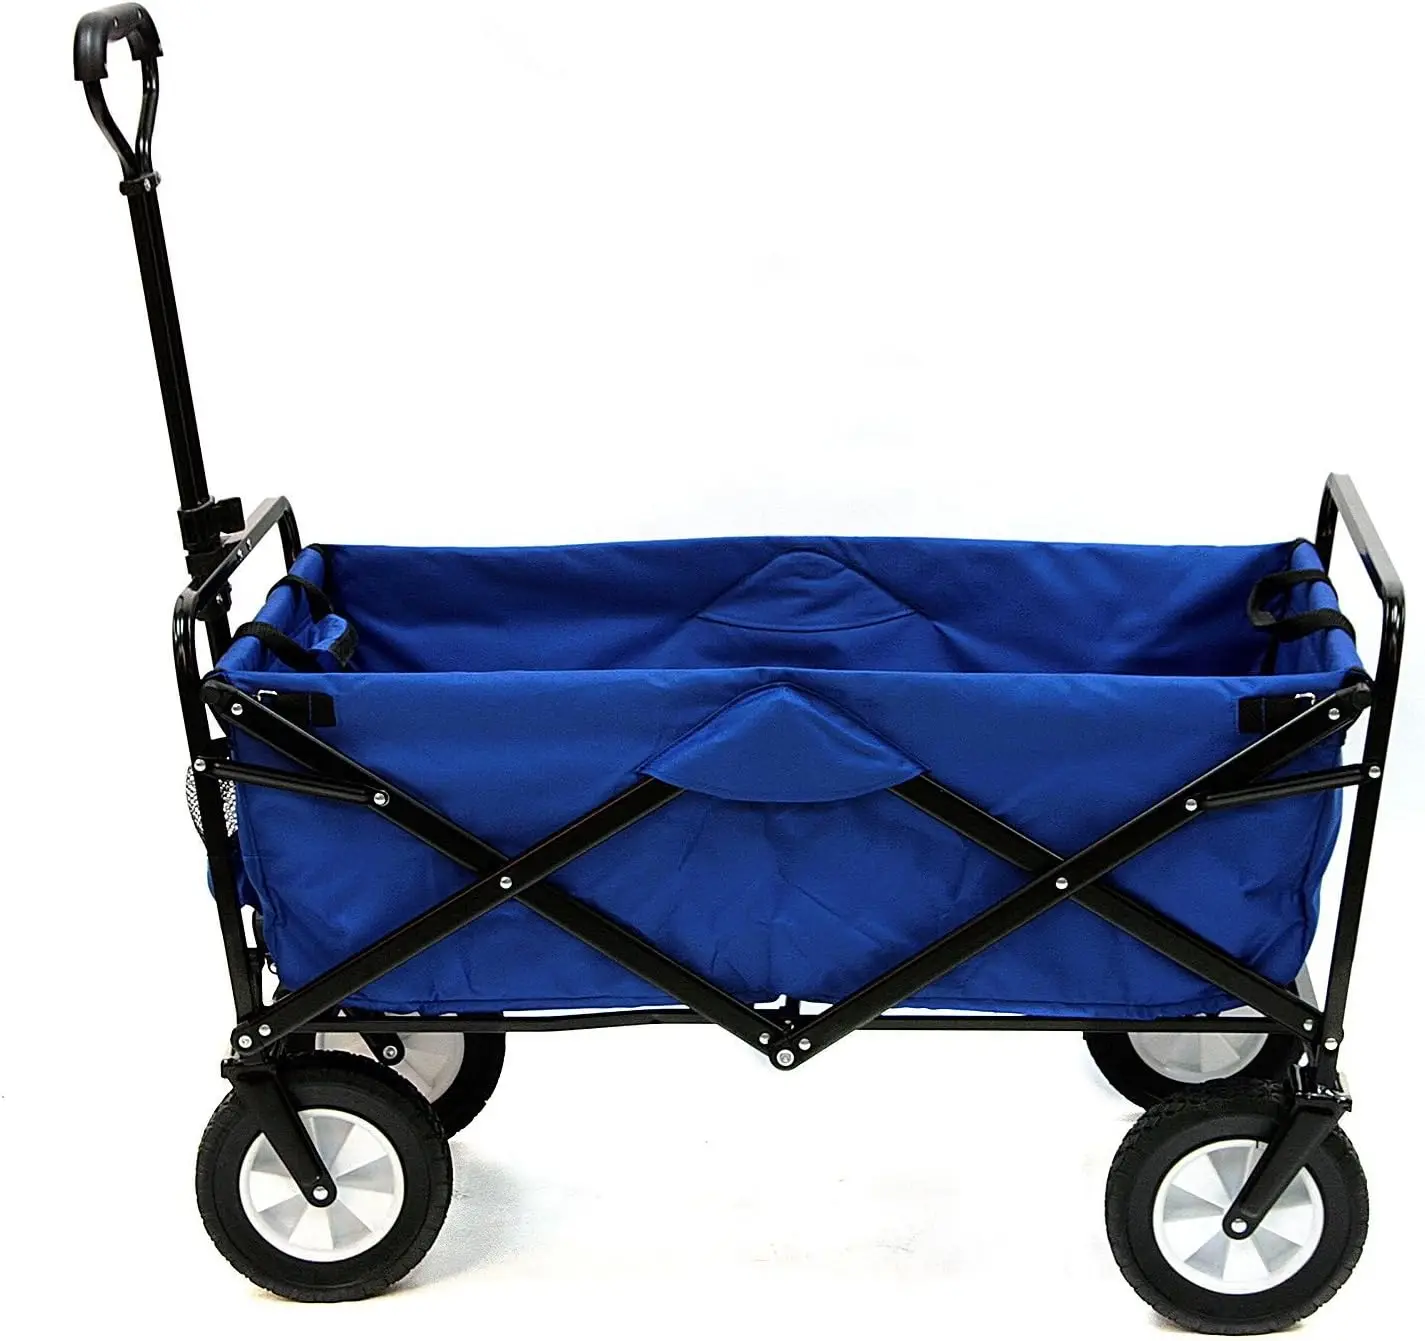 

Heavy Duty Steel Frame Collapsible Folding 150 Pound Capacity Outdoor Camping Garden Utility Wagon Yard Cart, Blue